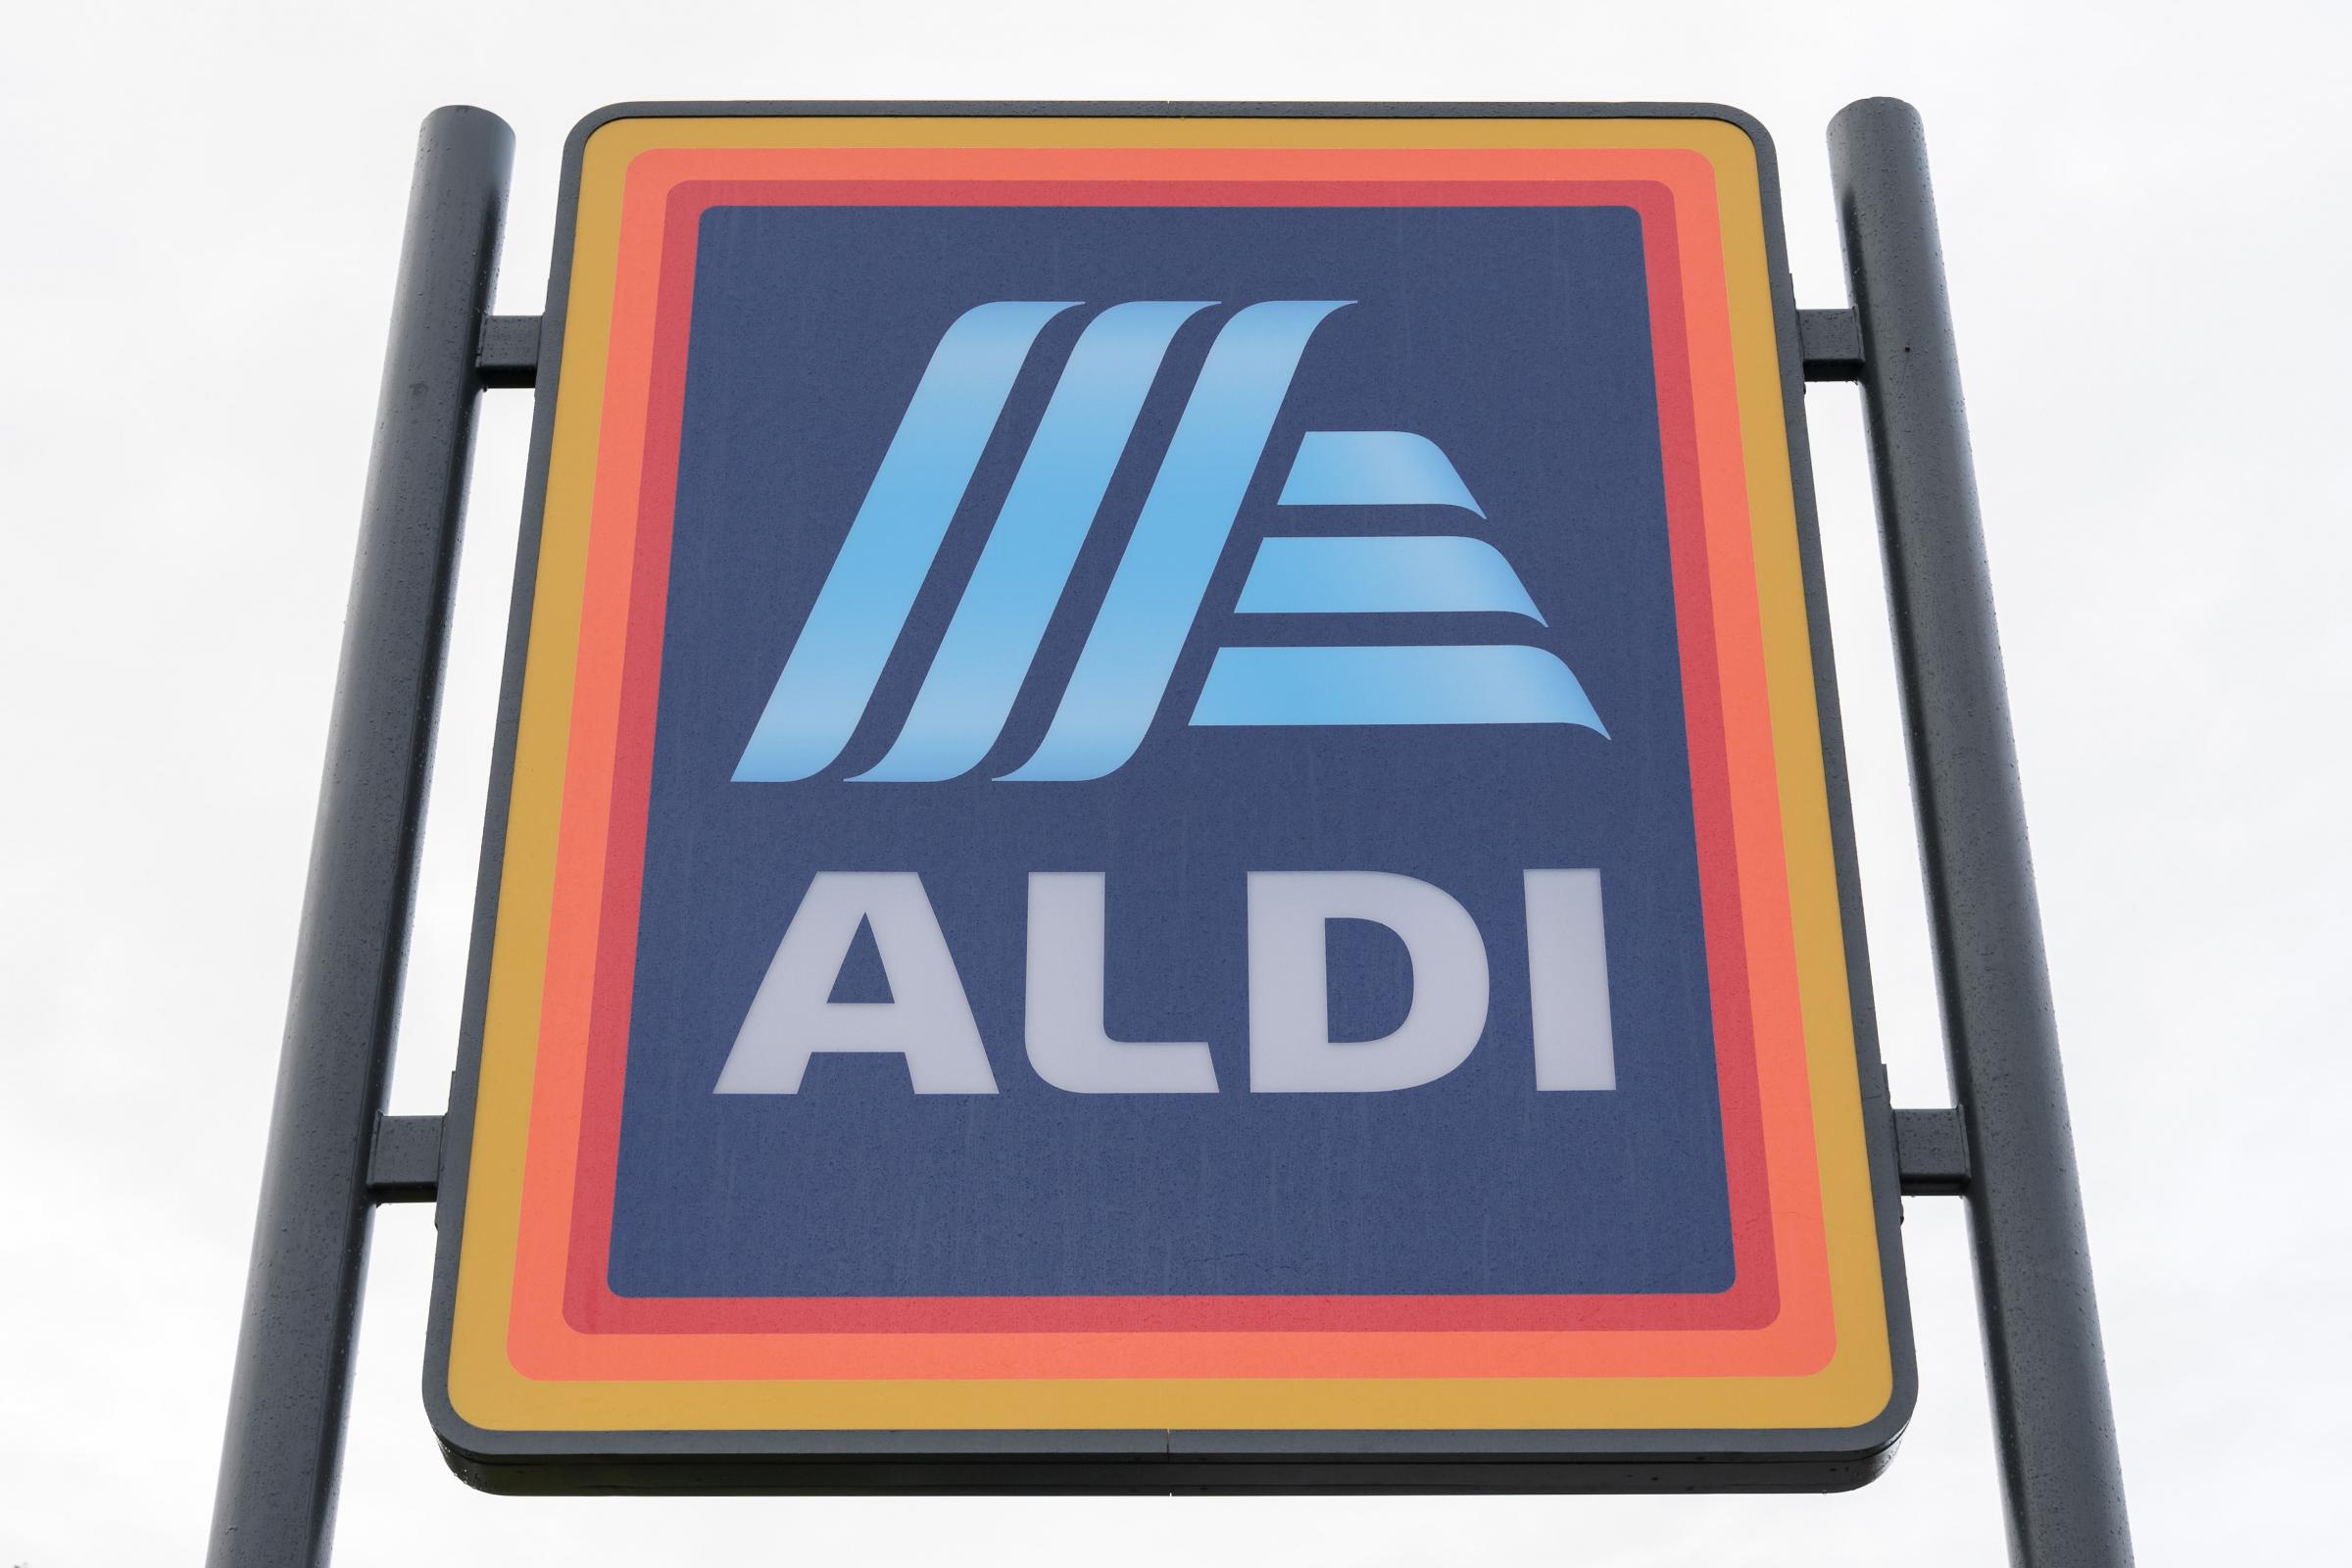 Aldi targets Brighton as it rolls out new smaller 'Aldi Local' shops for high streets